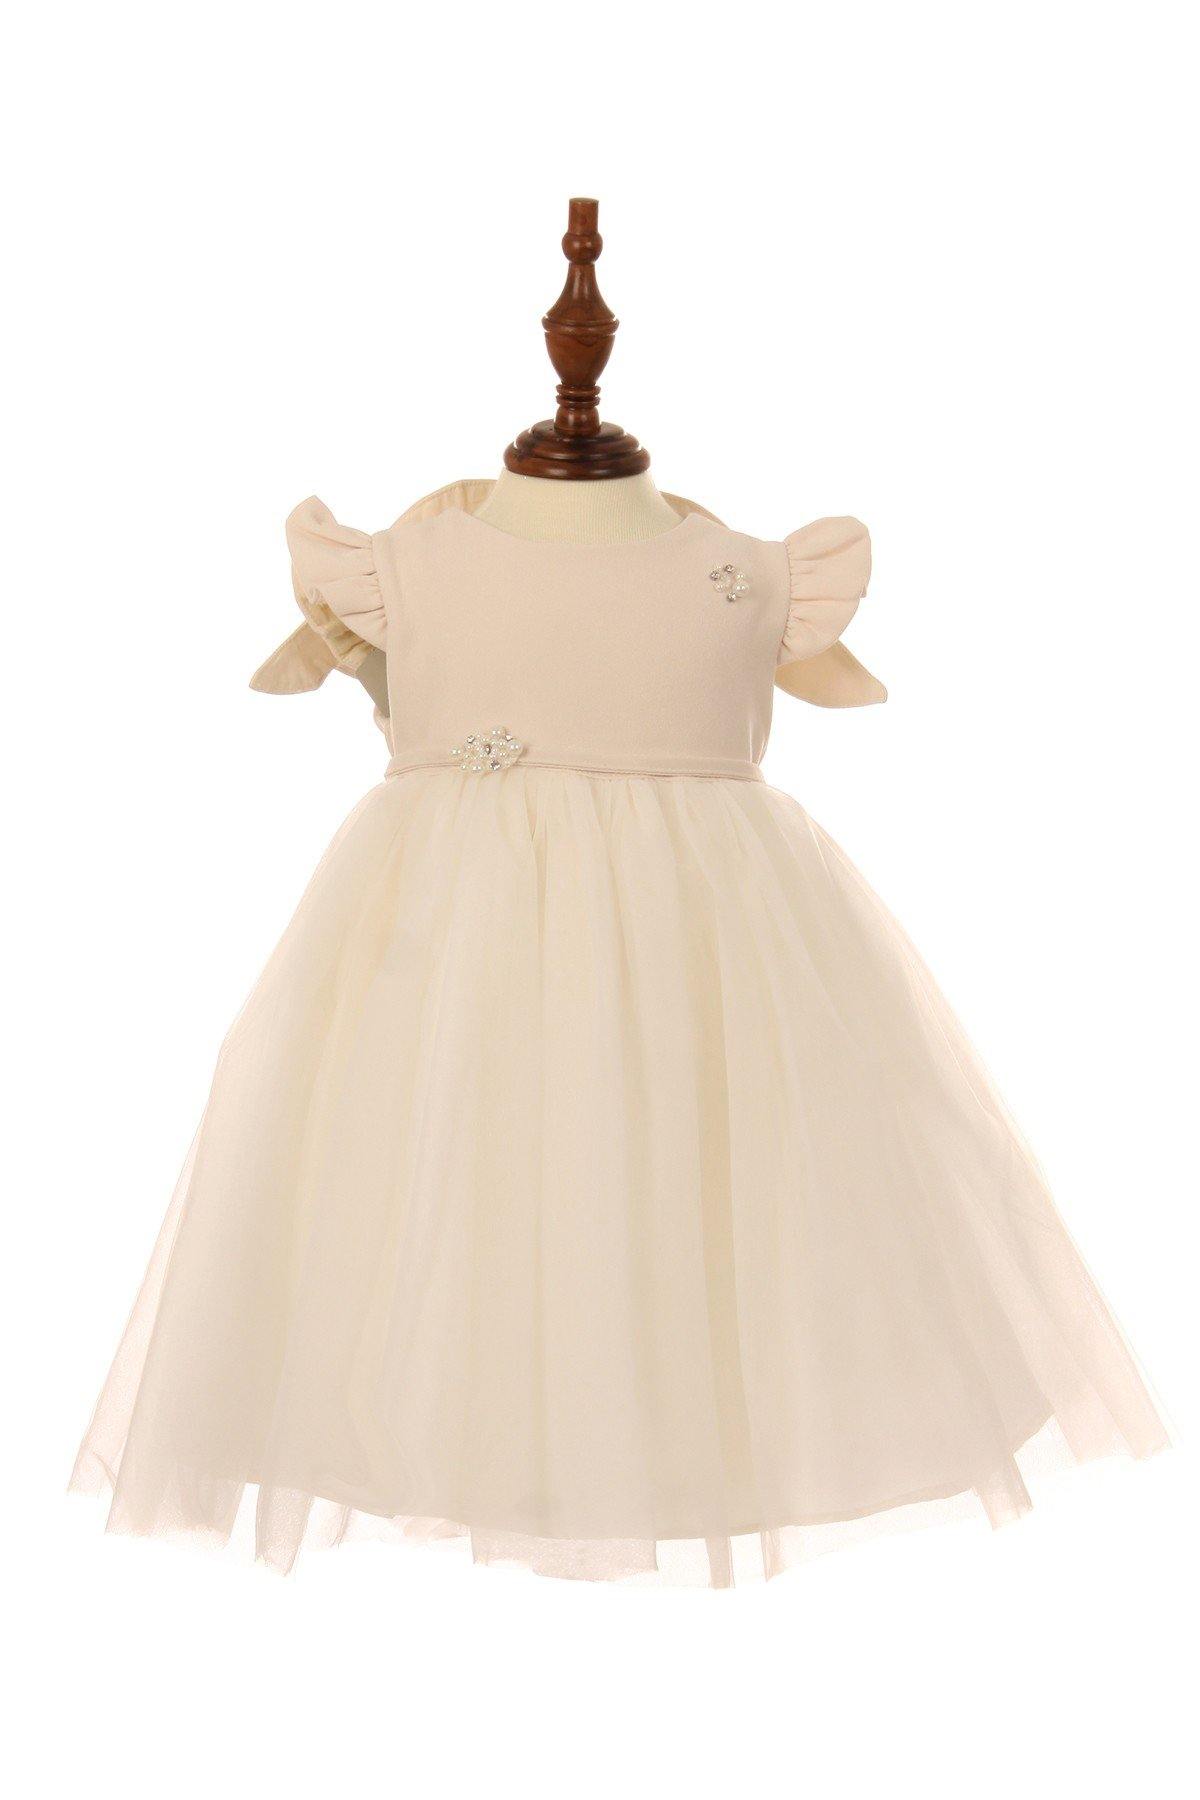 Adorable Two Tone Baby Dress - The Dress Outlet Cinderella Couture